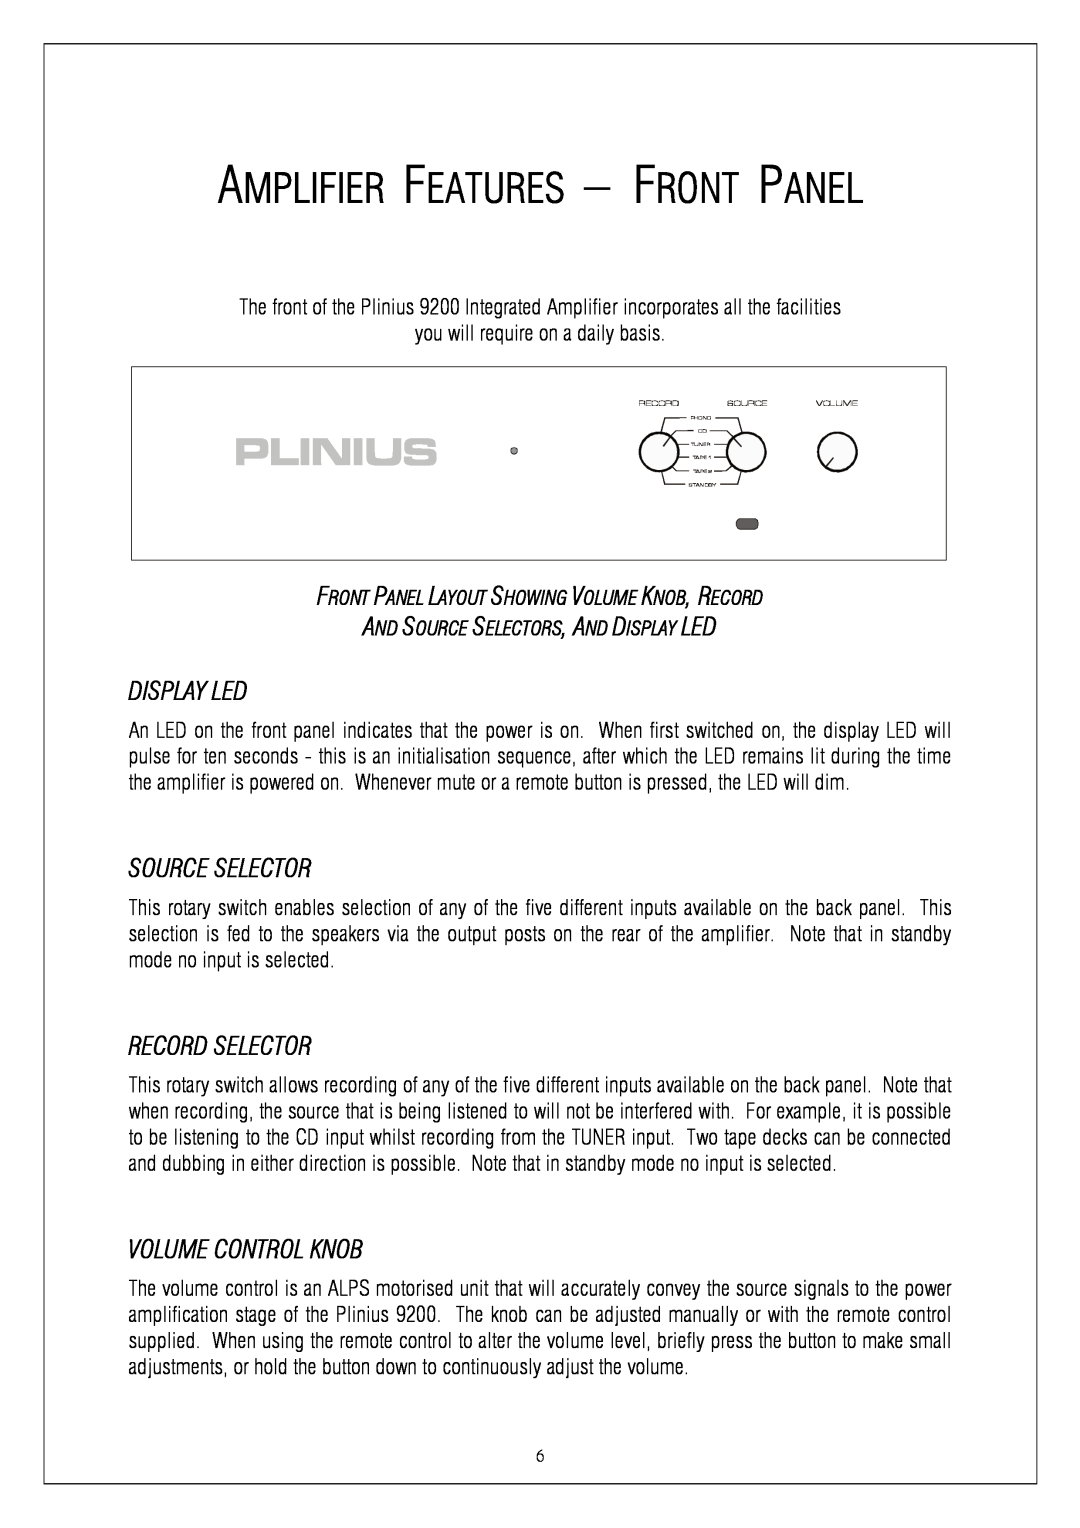 Plinius Audio 9200 Amplifier Features - Front Panel, Display Led, Source Selector, Record Selector, Volume Control Knob 